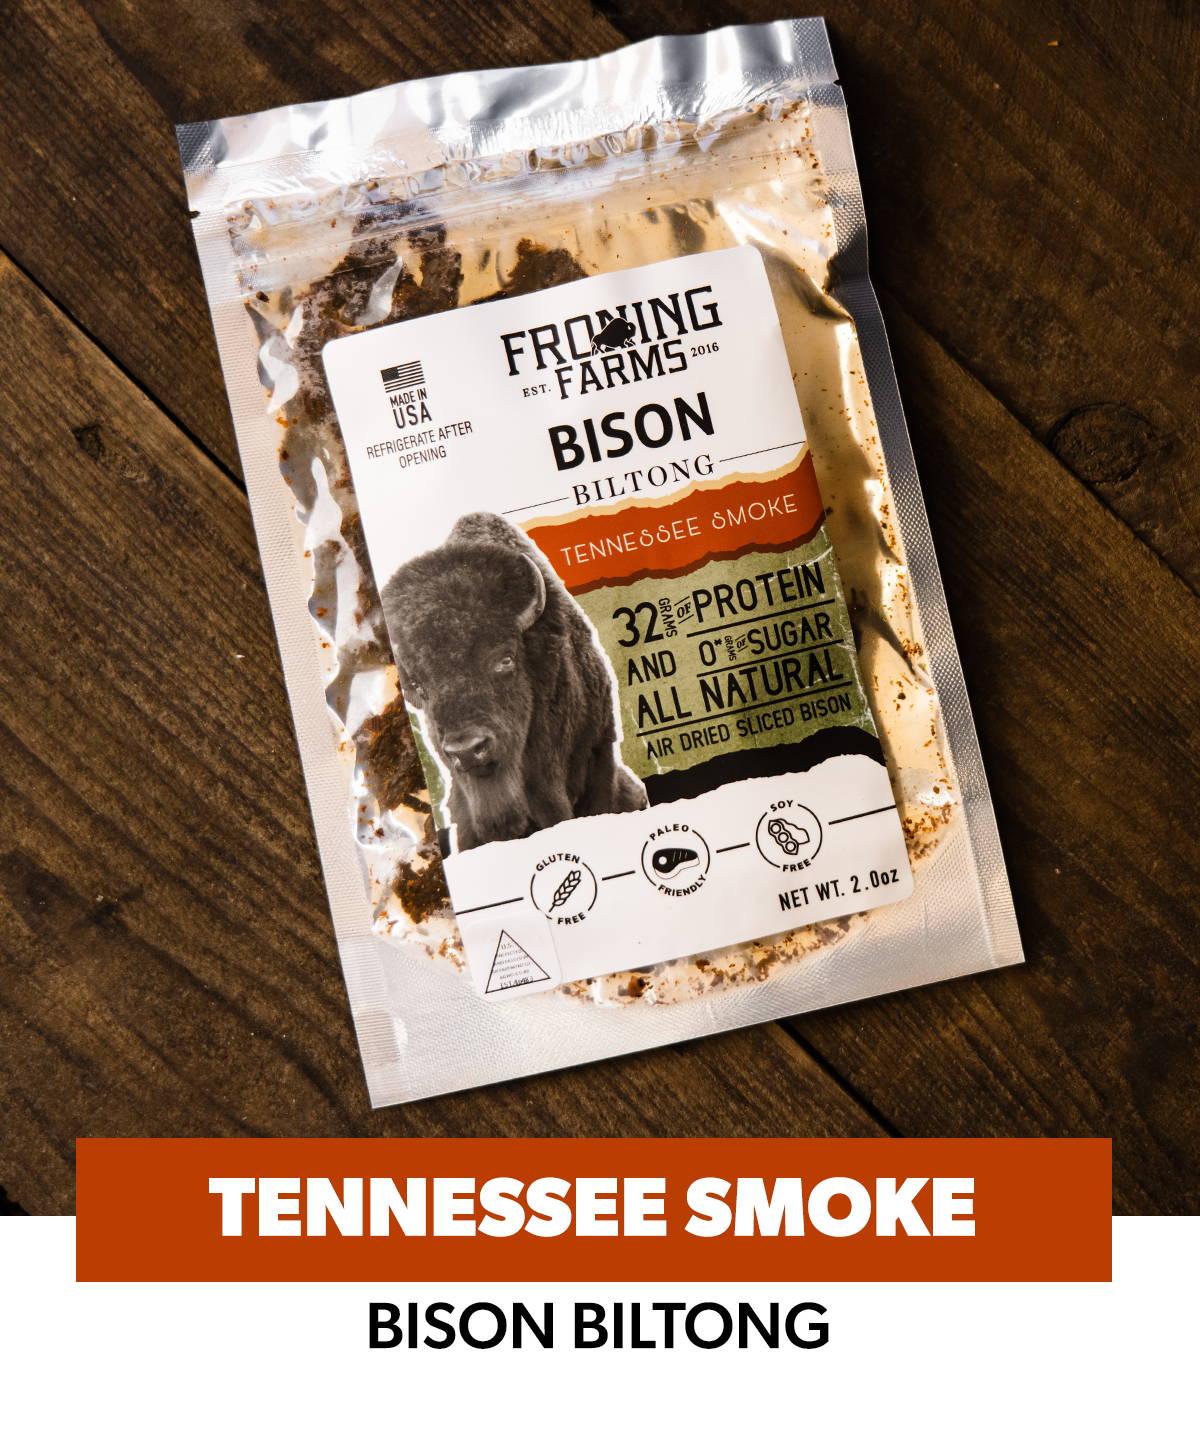 froning farms bison biltong tennessee smoke